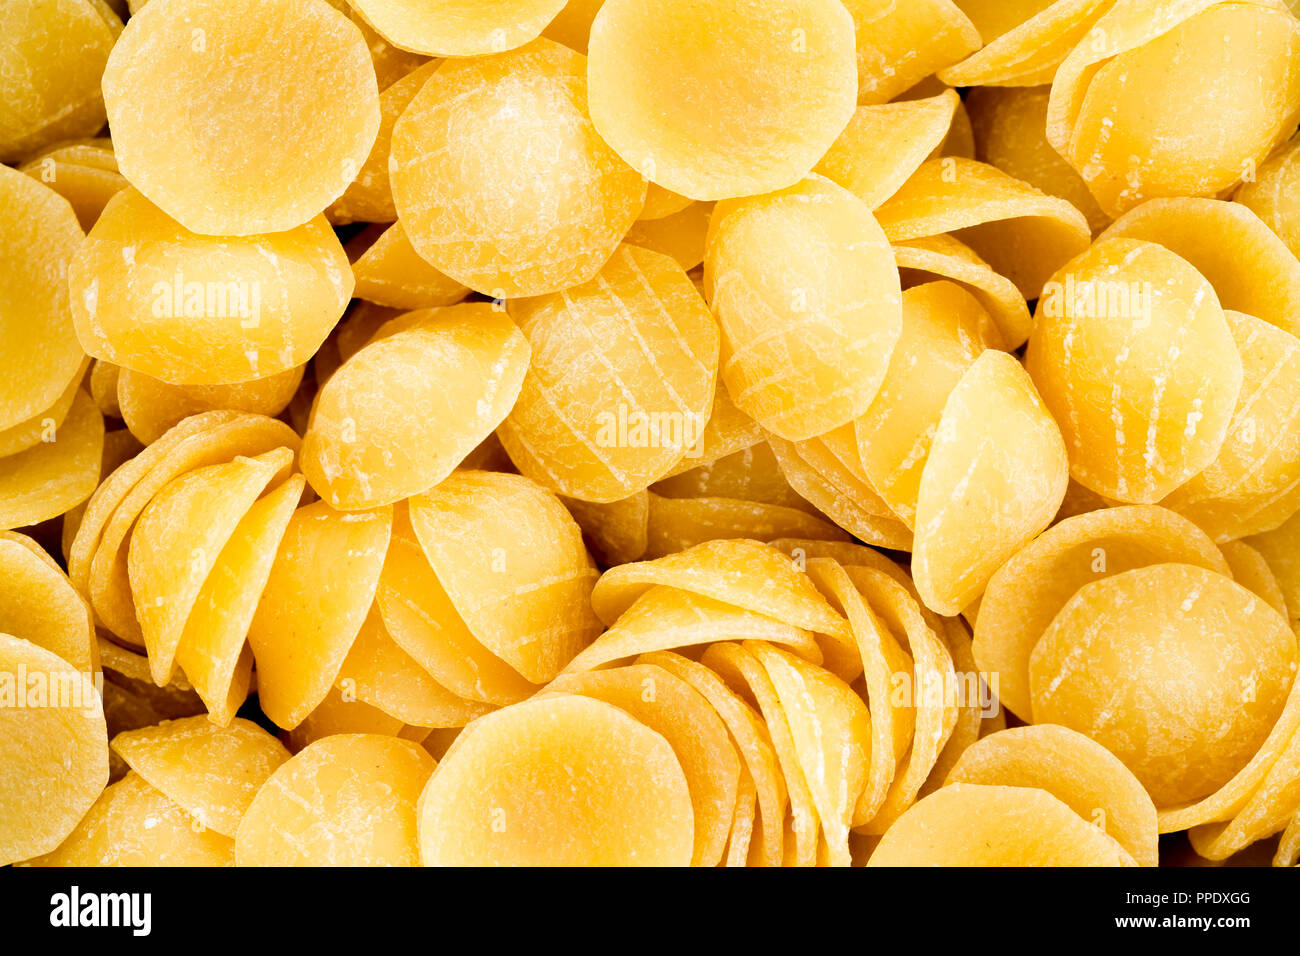 Close up full frame texture of fresh orecchiette Italian pasta shaped like concave discs or ears and a speciality noodle from the Apulia region of Ita Stock Photo